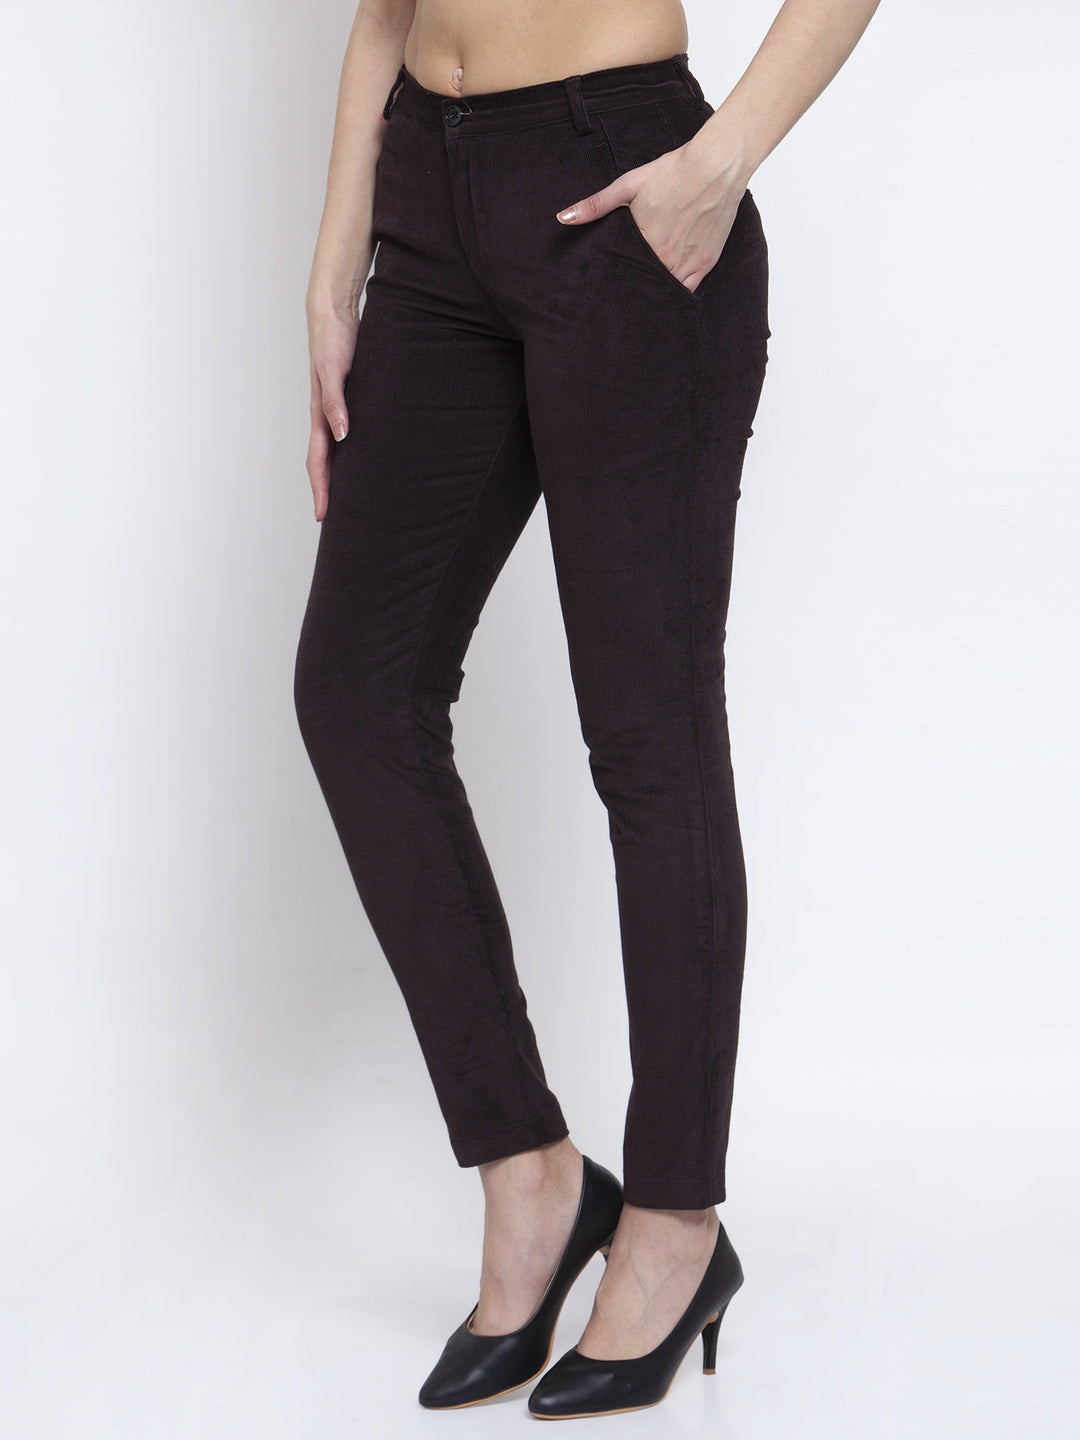 Cotrise Pant Track Pants  Buy Cotrise Pant Track Pants online in India